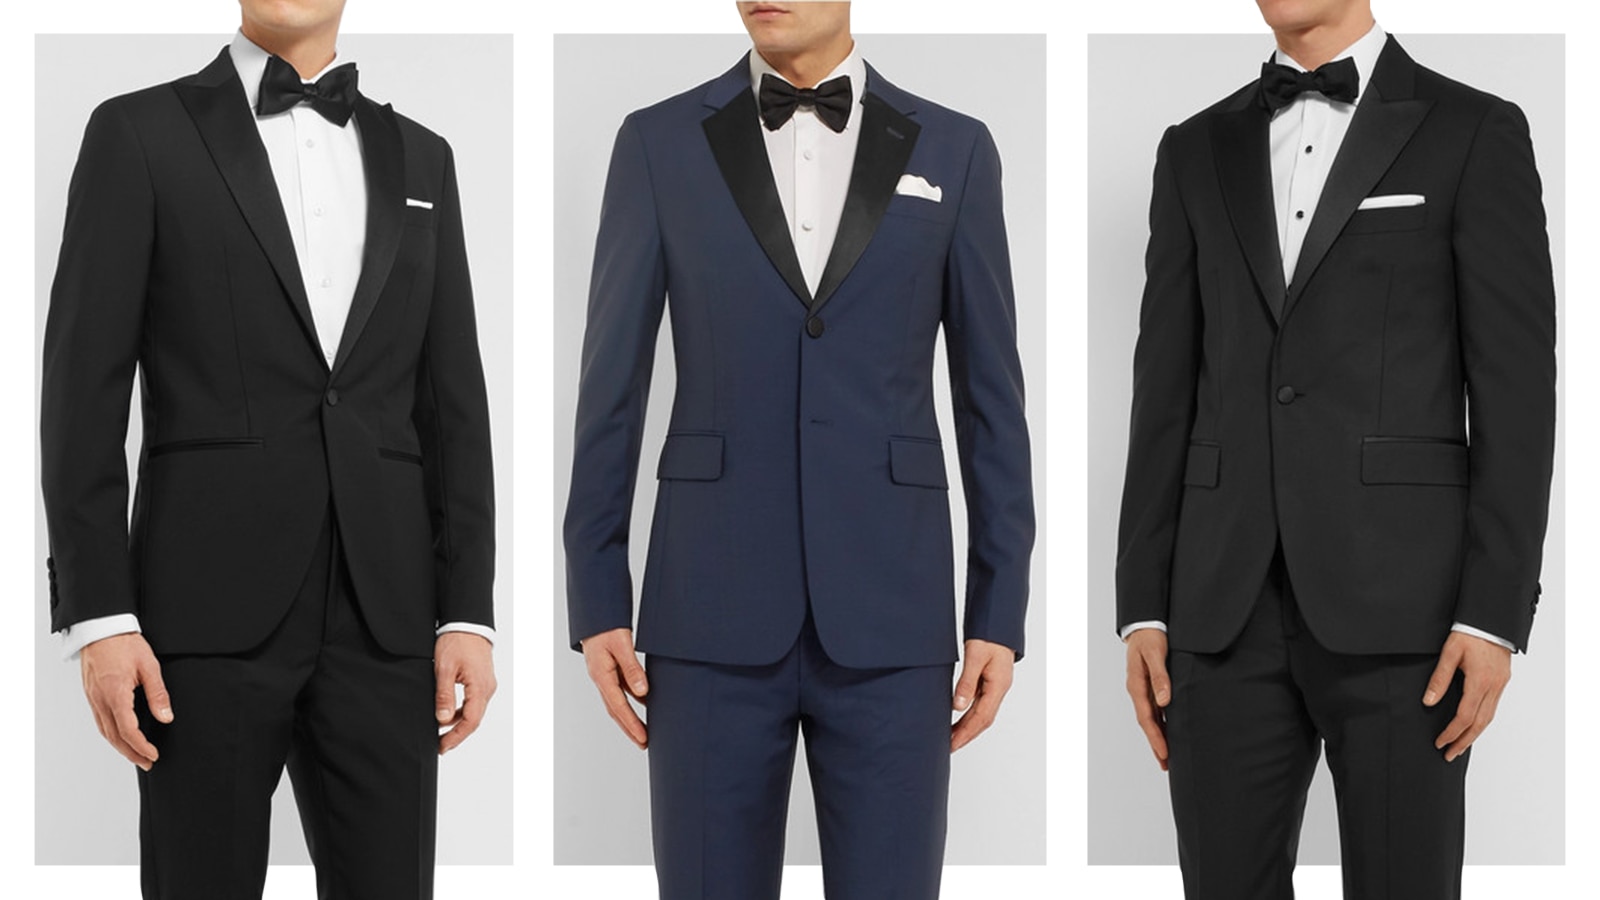 Three Tuxedos To Invest In For Spring 2018 | The Journal | MR PORTER